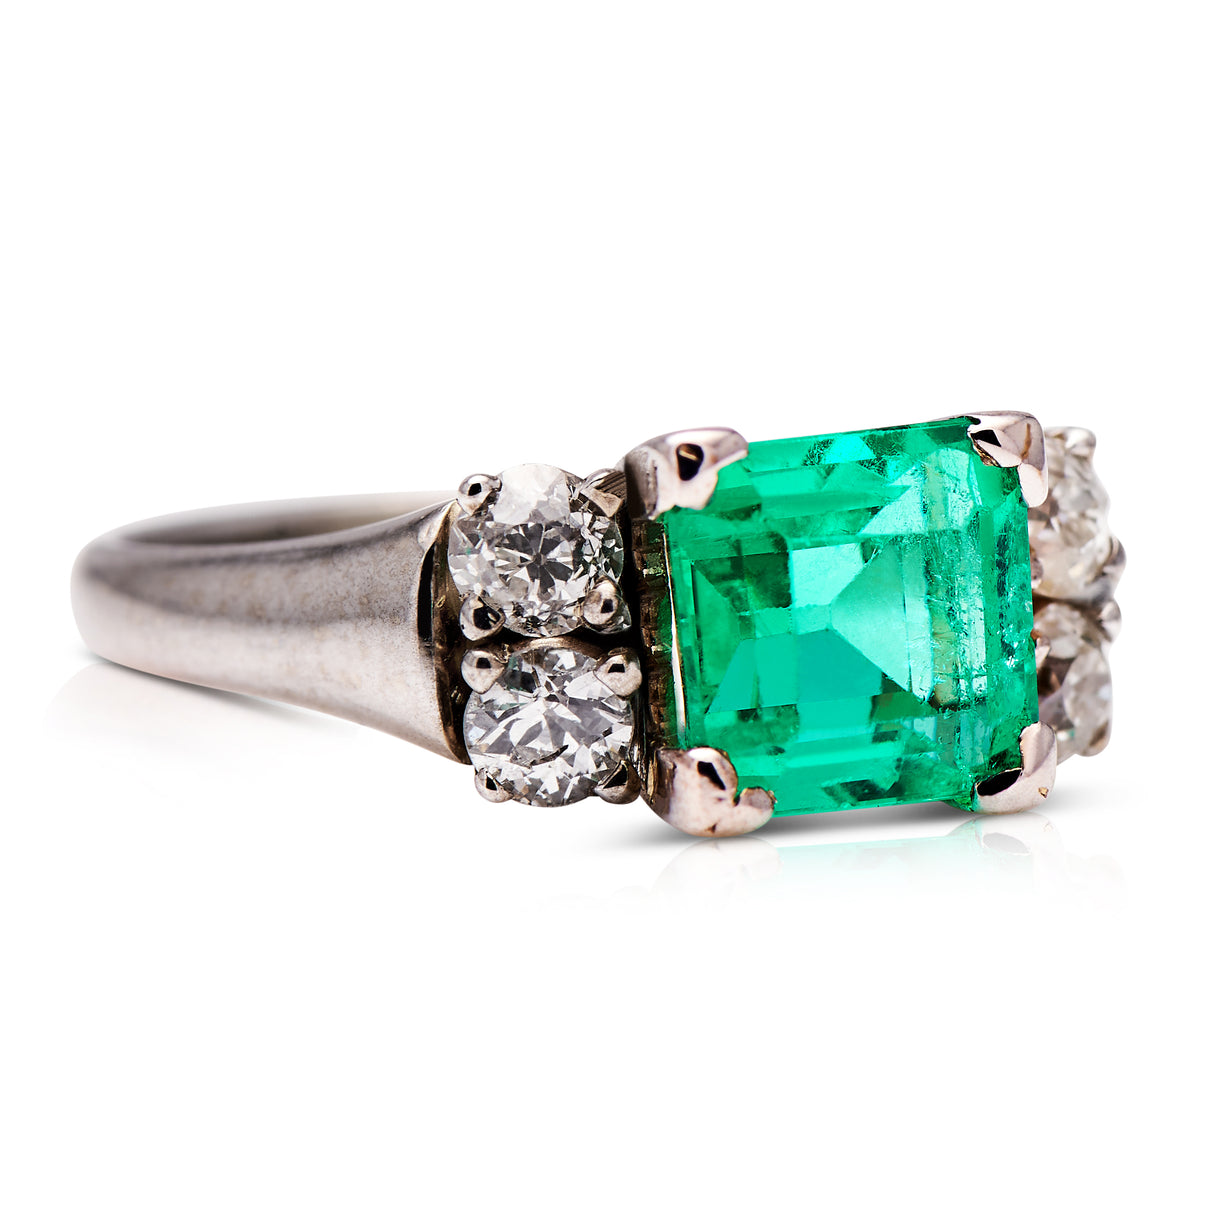 Art Deco, 14ct White Gold, Colombian Emerald and Diamond Ring